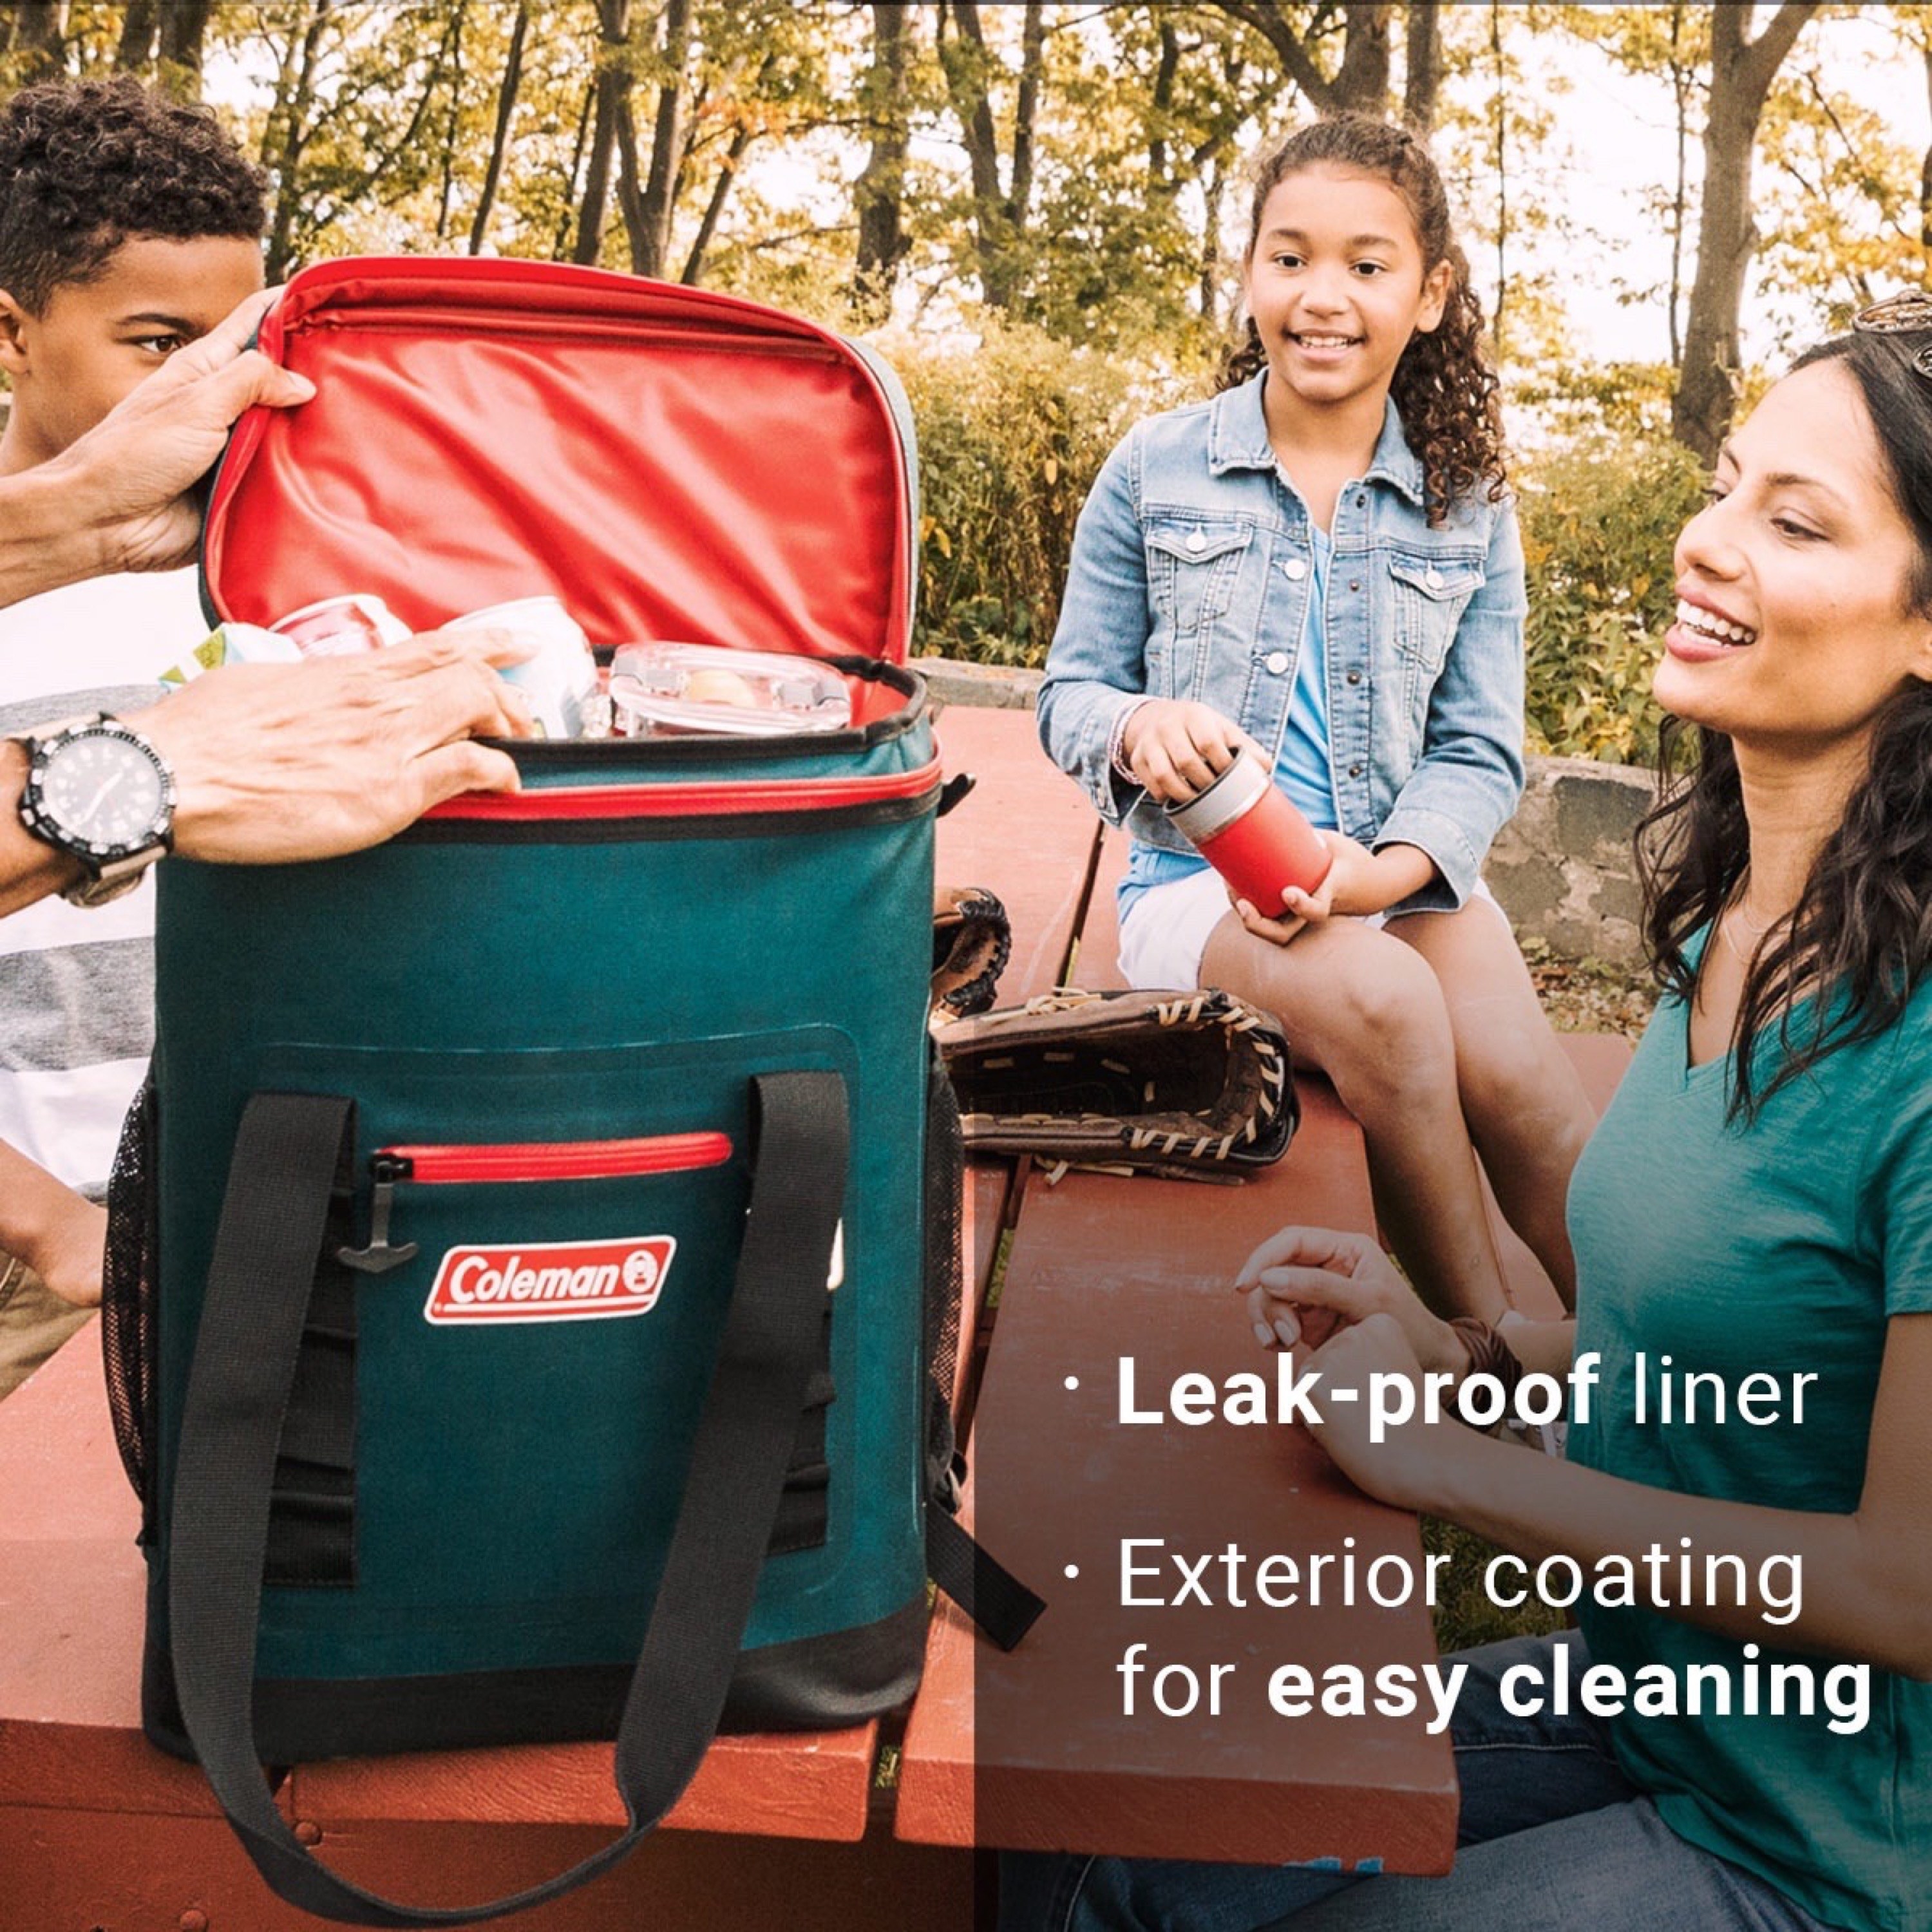 The red and green backpack with text about its leak-proof liner and exterior coating for easy cleaning  